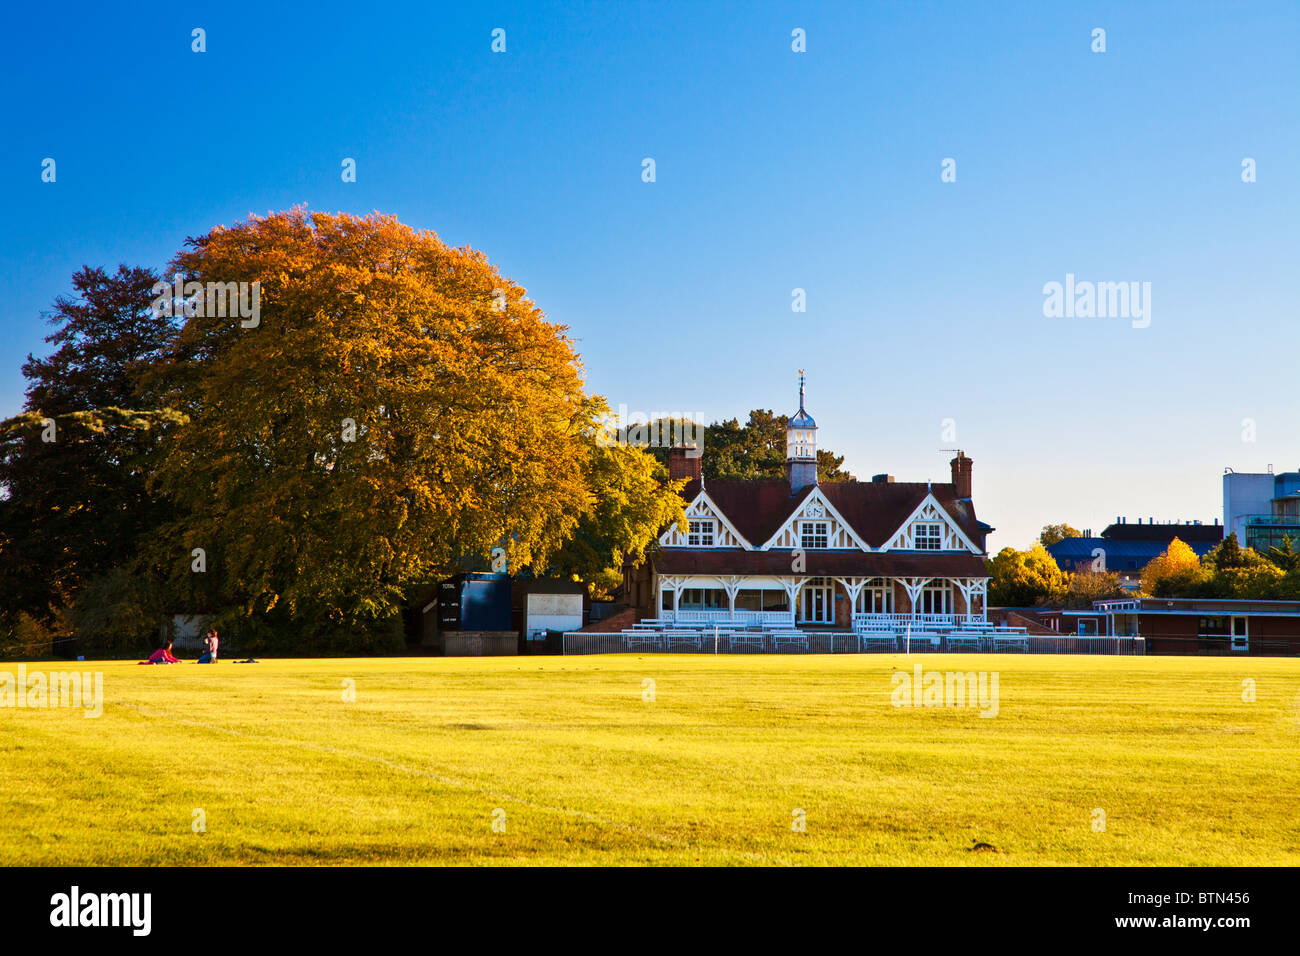 The cricket pavillion in the University Parks, Oxford, Oxfordshire, England, UK, Great Britain Stock Photo